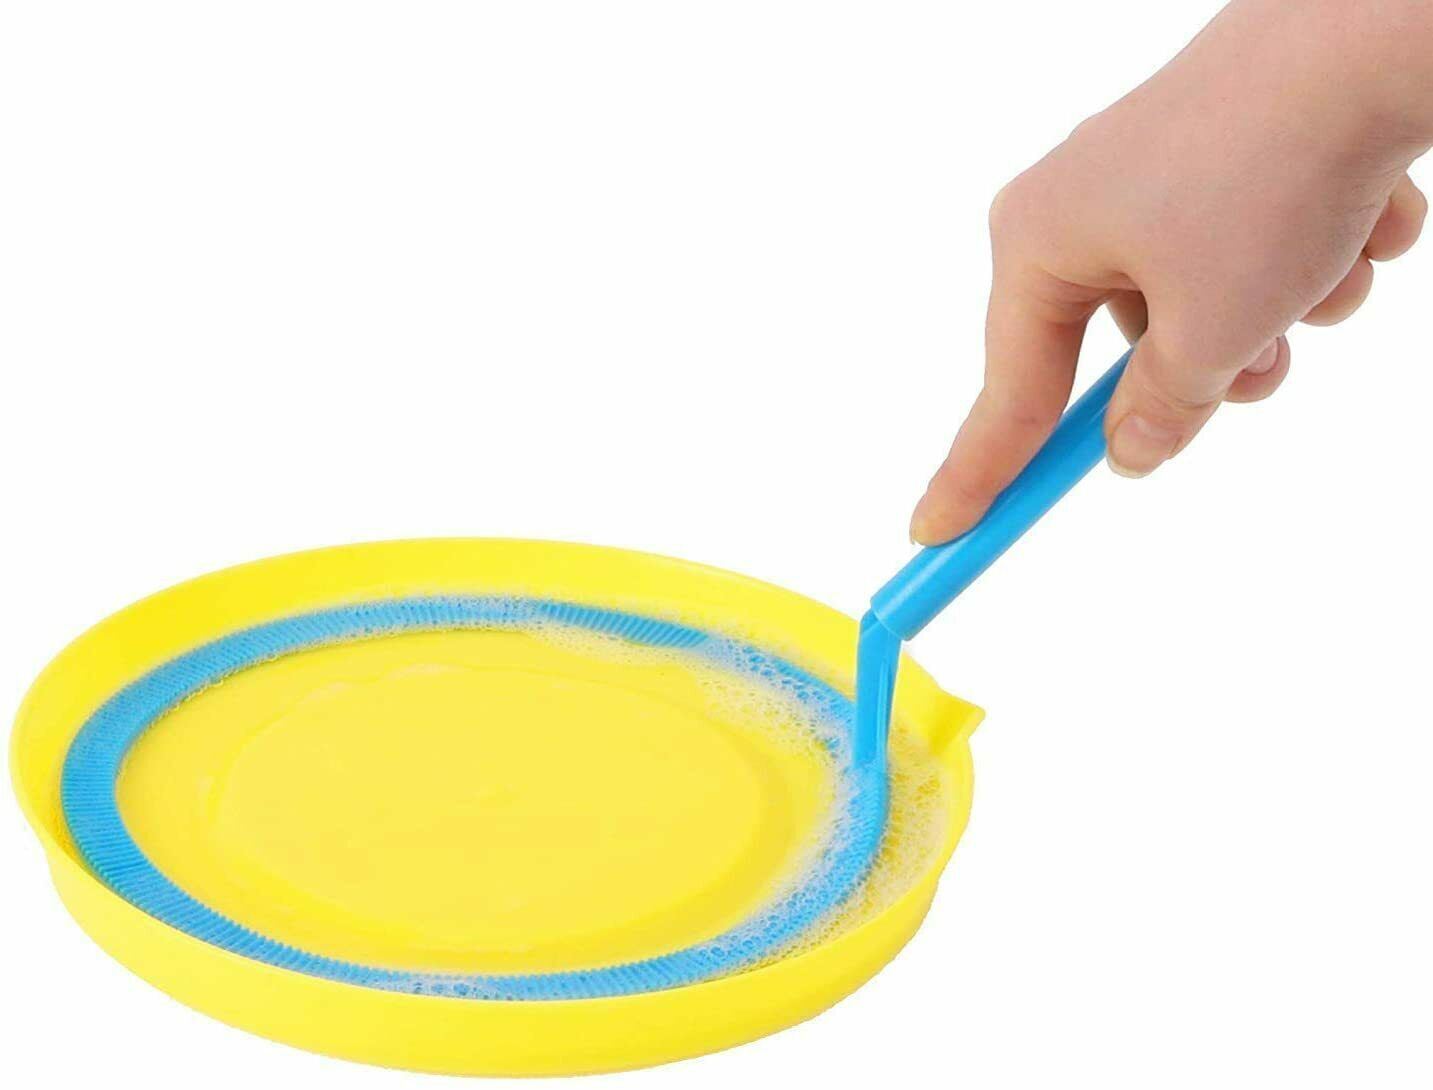 Large Bubble Blowing Kit by The Magic Toy Shop - UKBuyZone